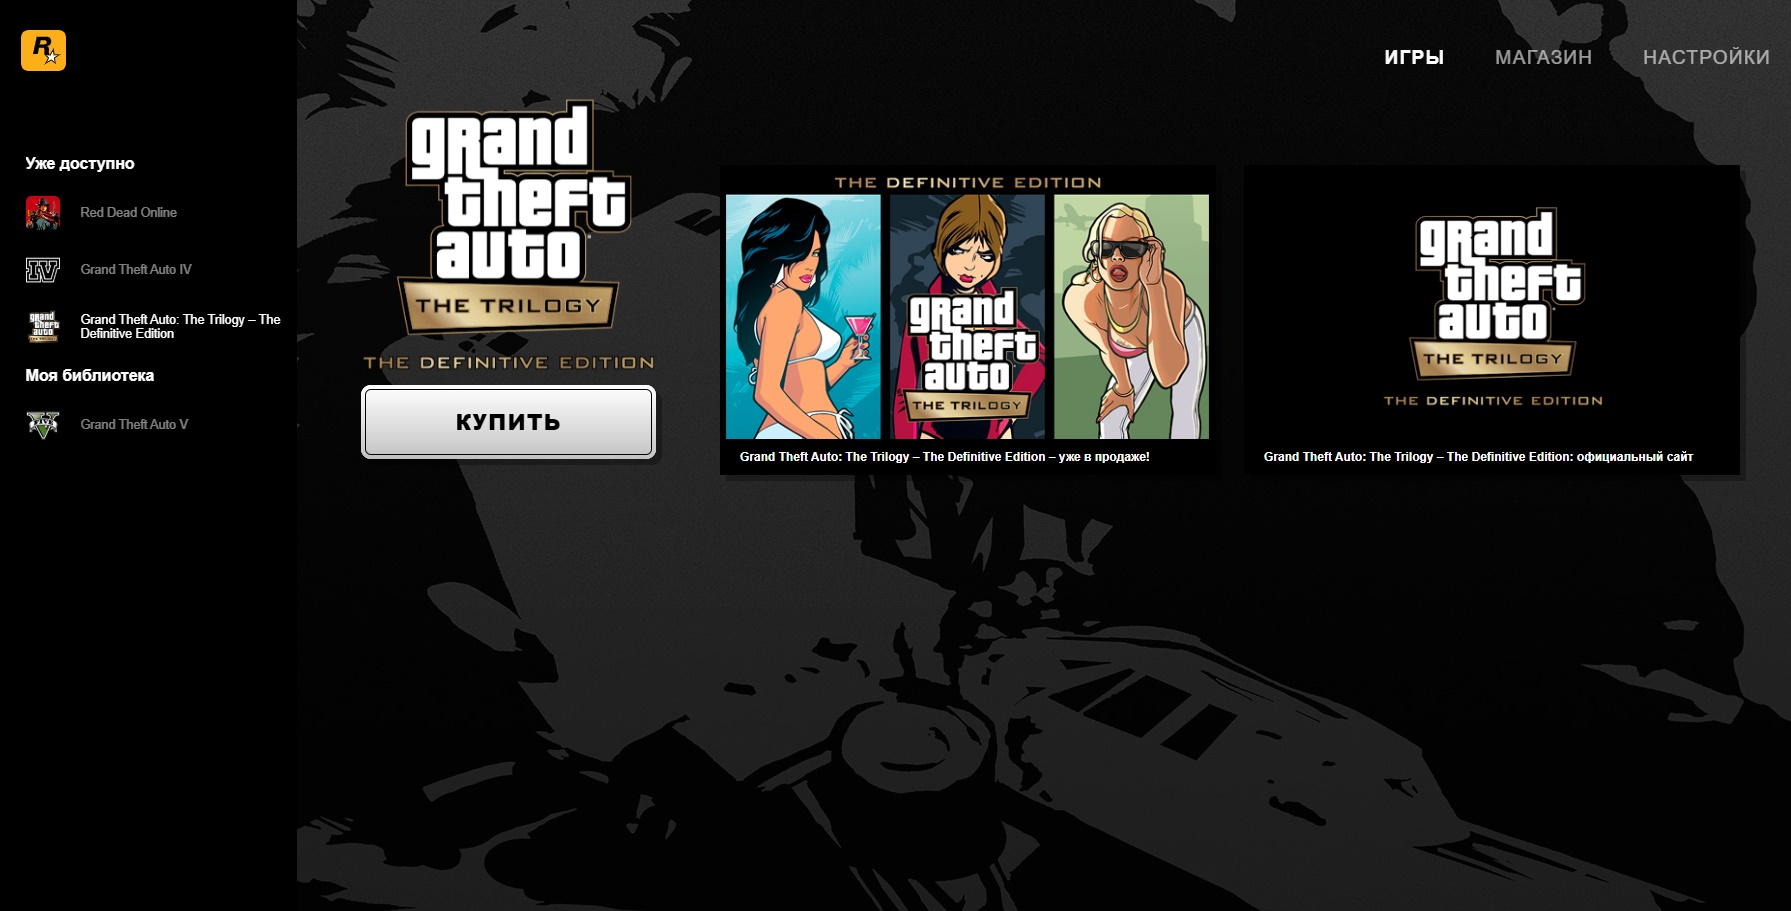 Error could not access game process shutdown rockstar games launcher and steam epic фото 41